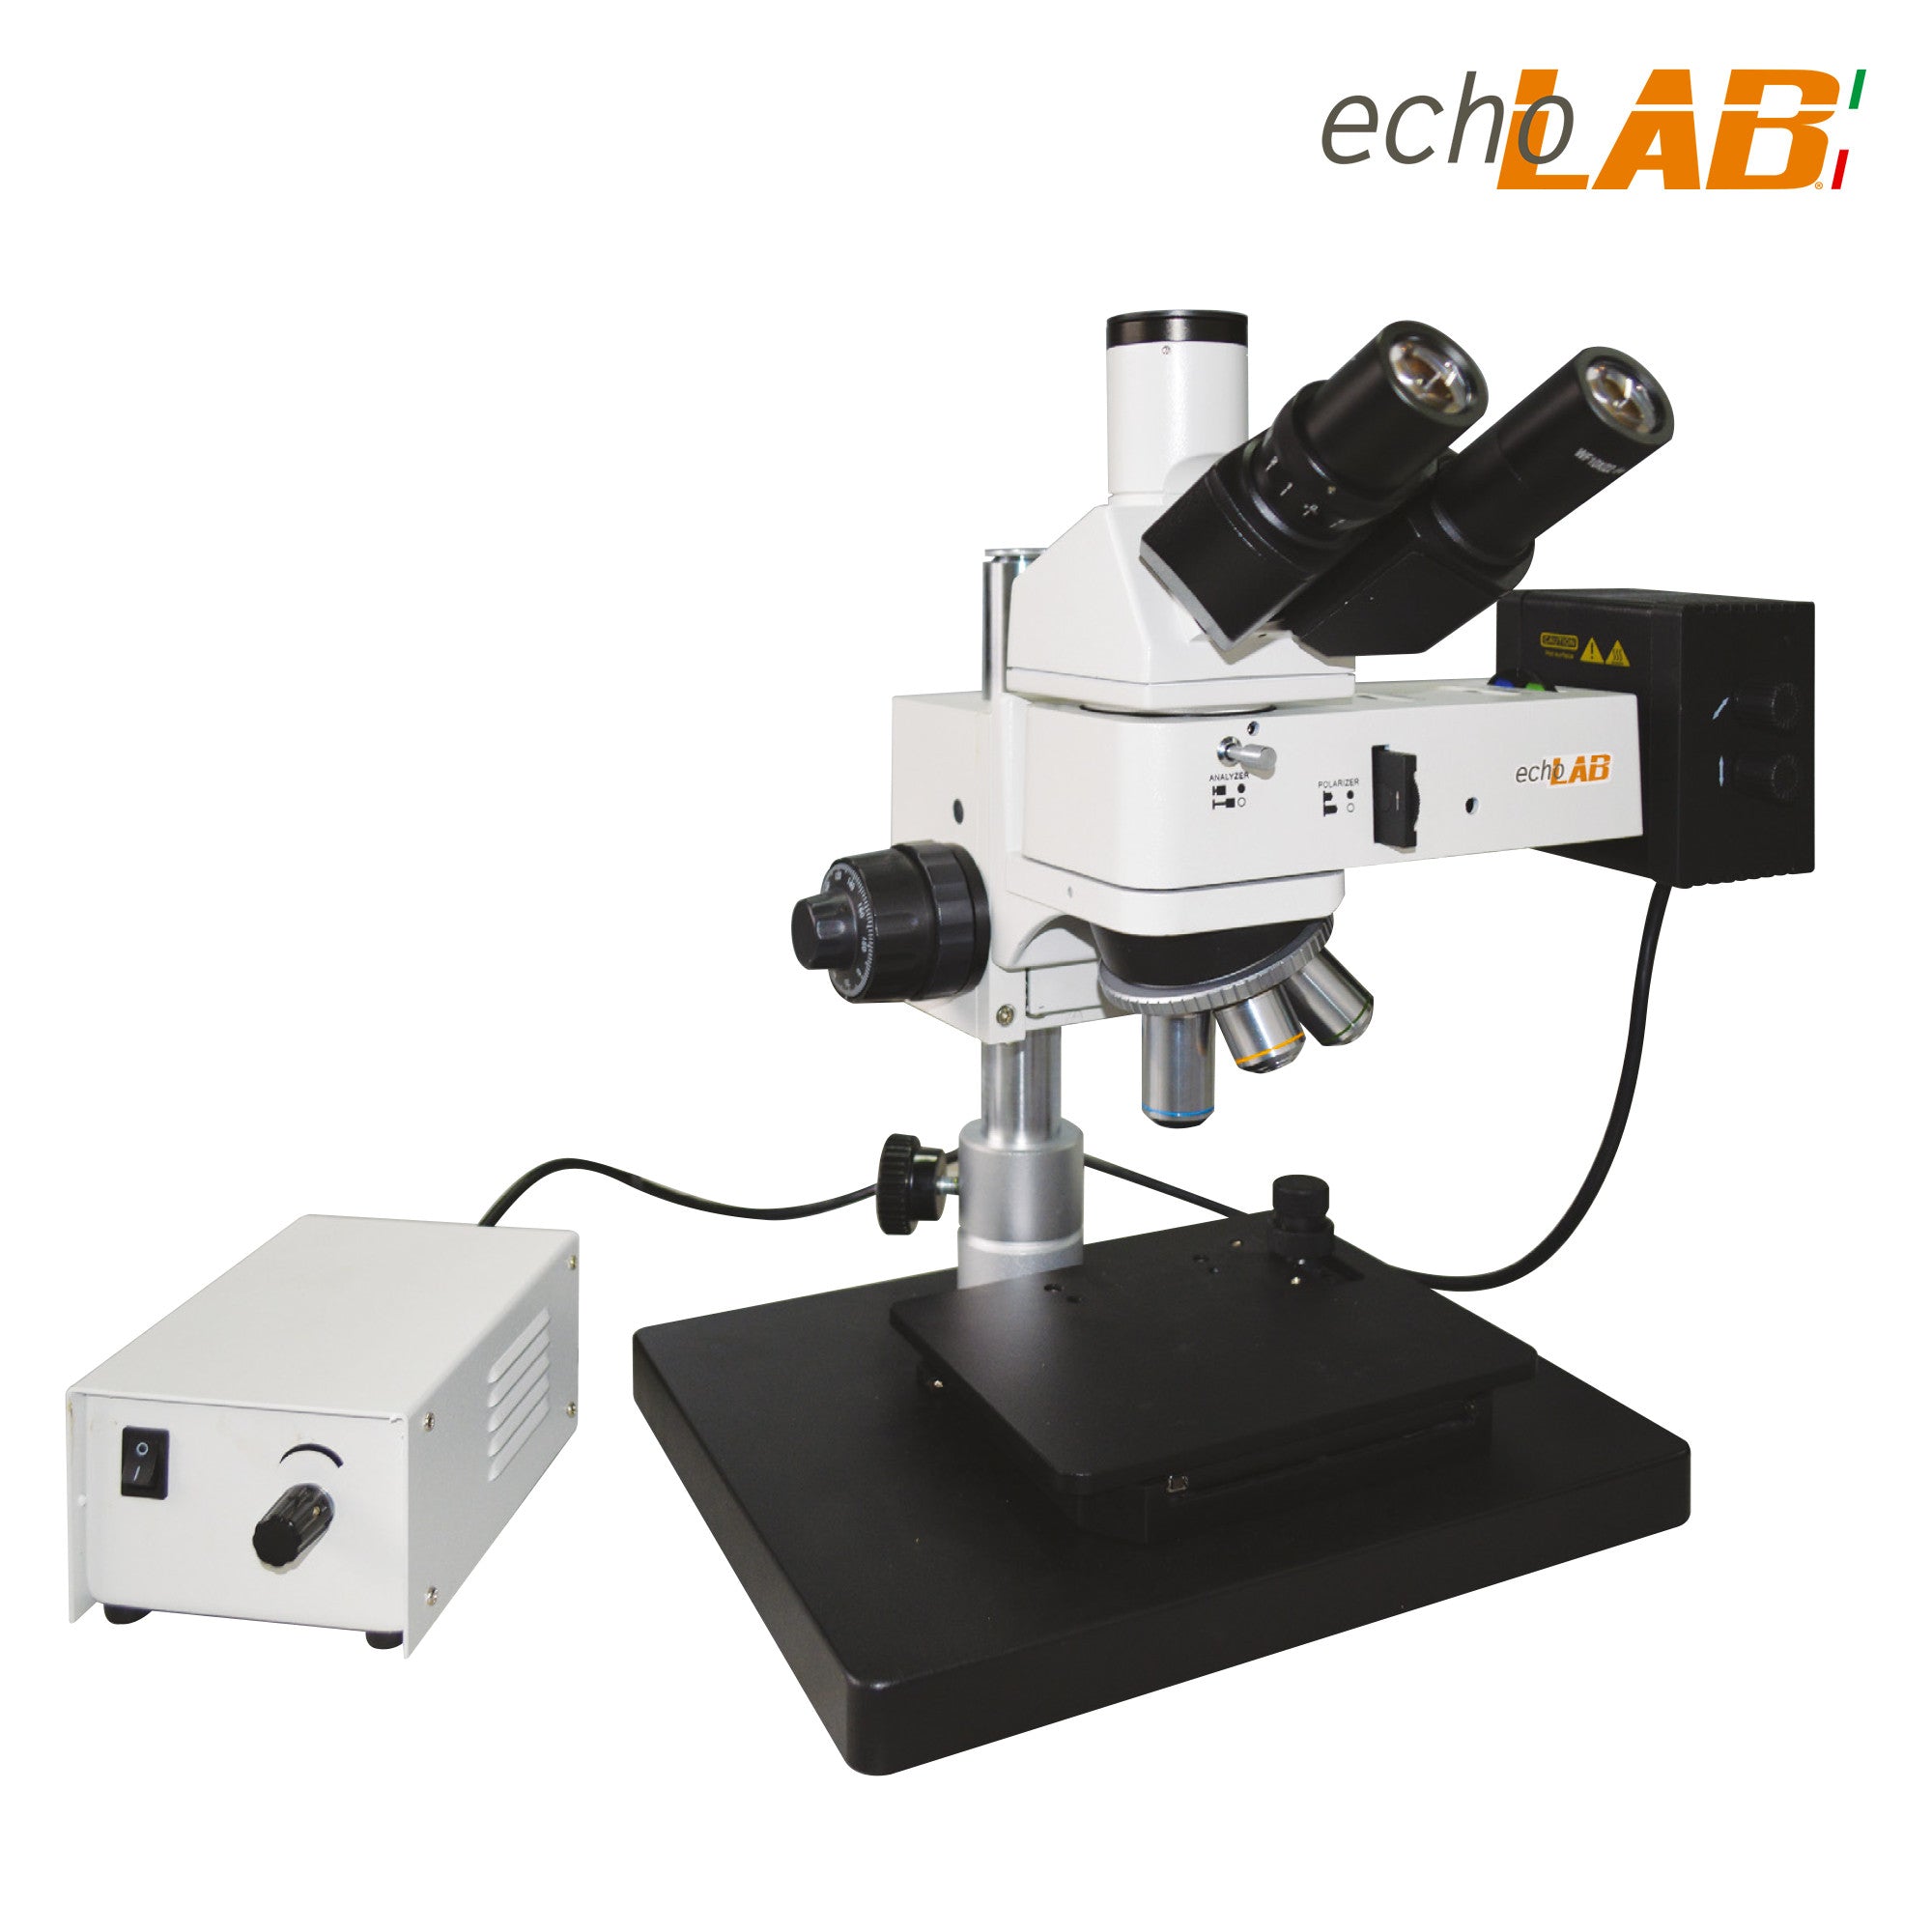 Upright material science microscopes mechanical stage 185x140 - UM 400I - echoLAB